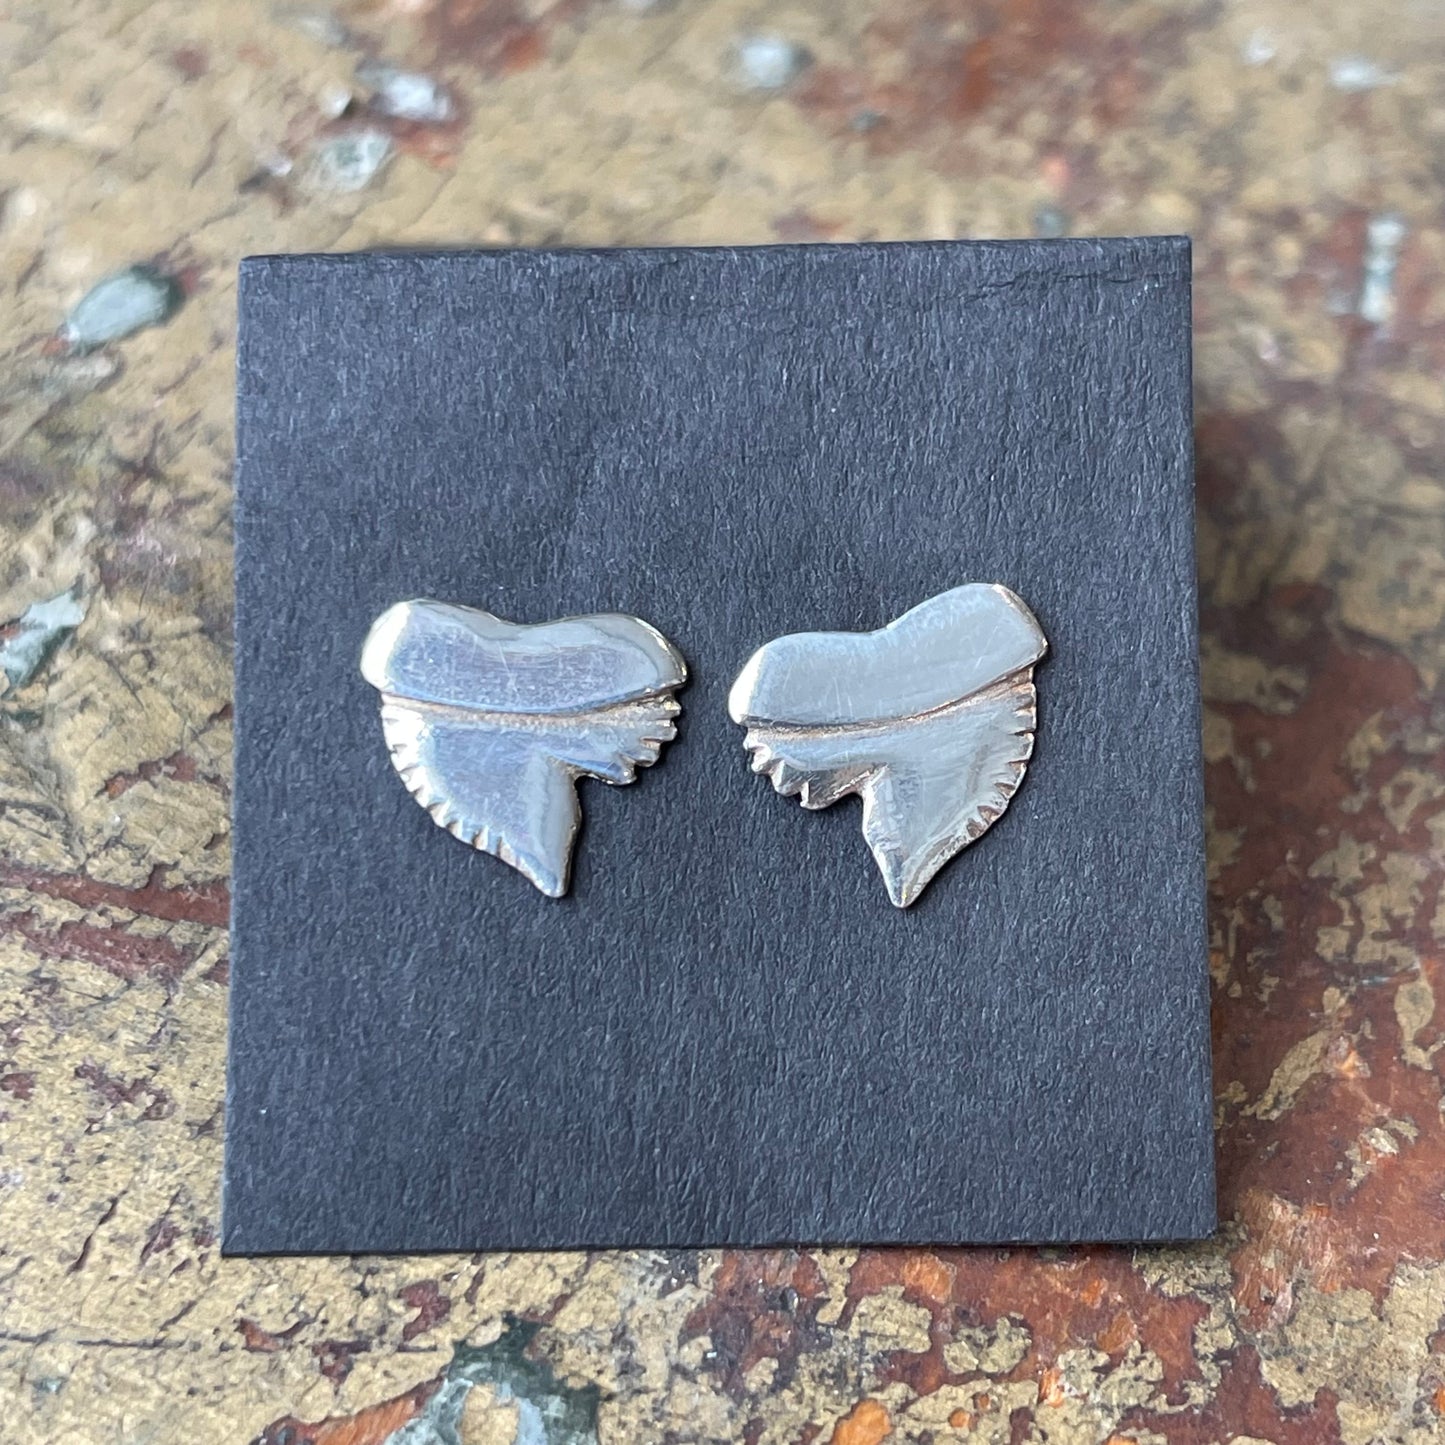 Silver Shark Tooth Studs